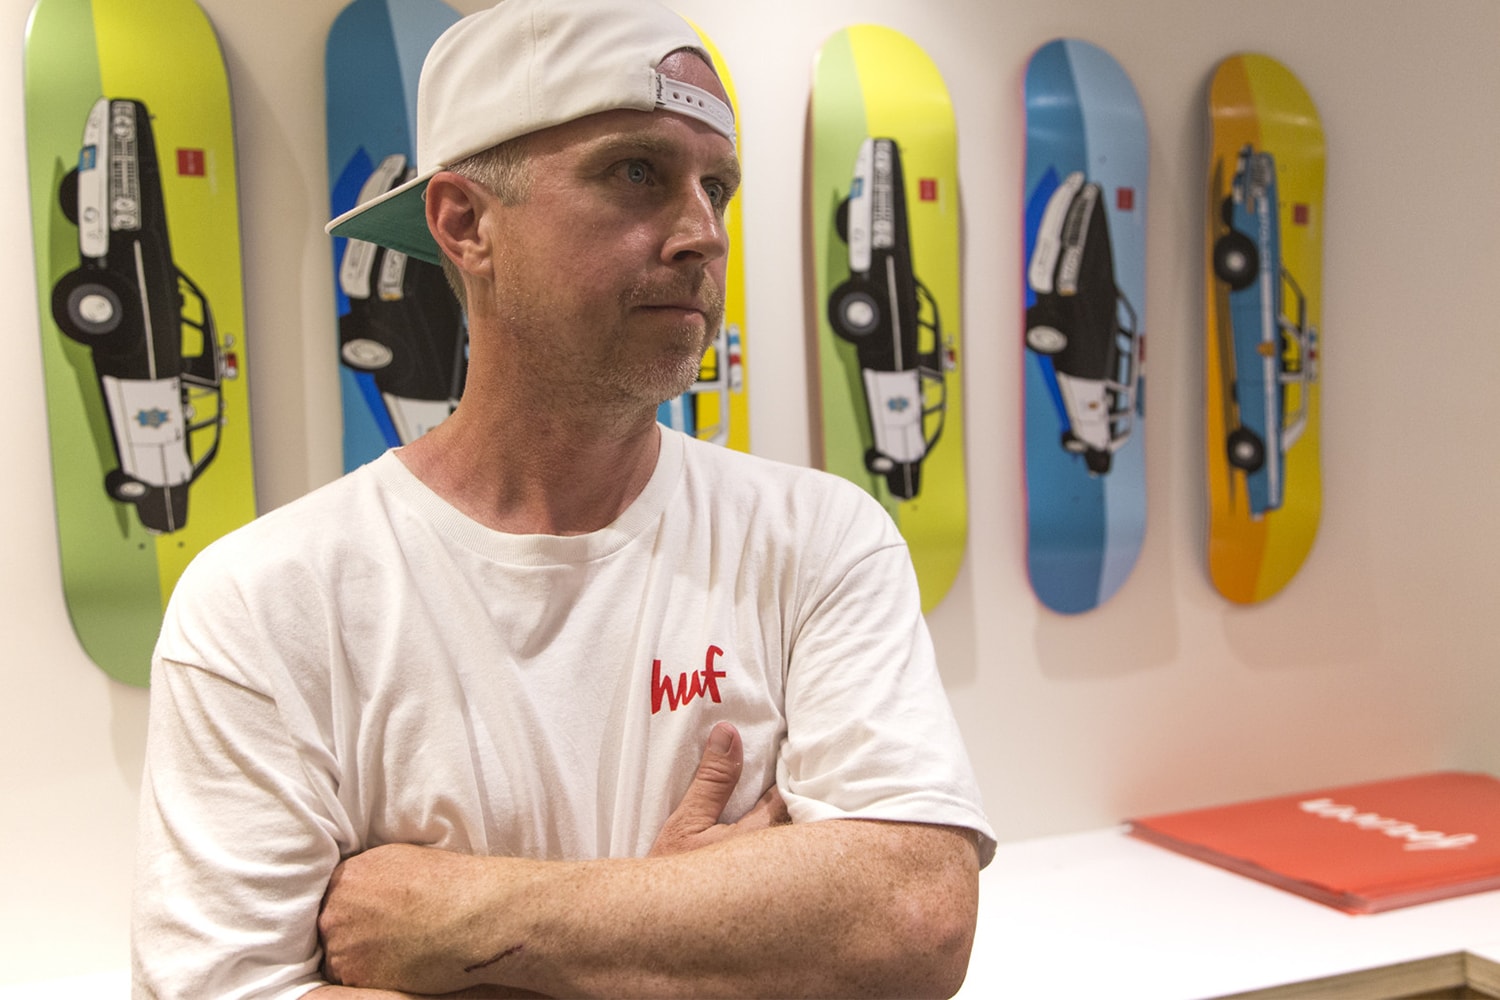 Keith Hufnagel Dead Age 46 brain cancer Info HUF Skate Icon